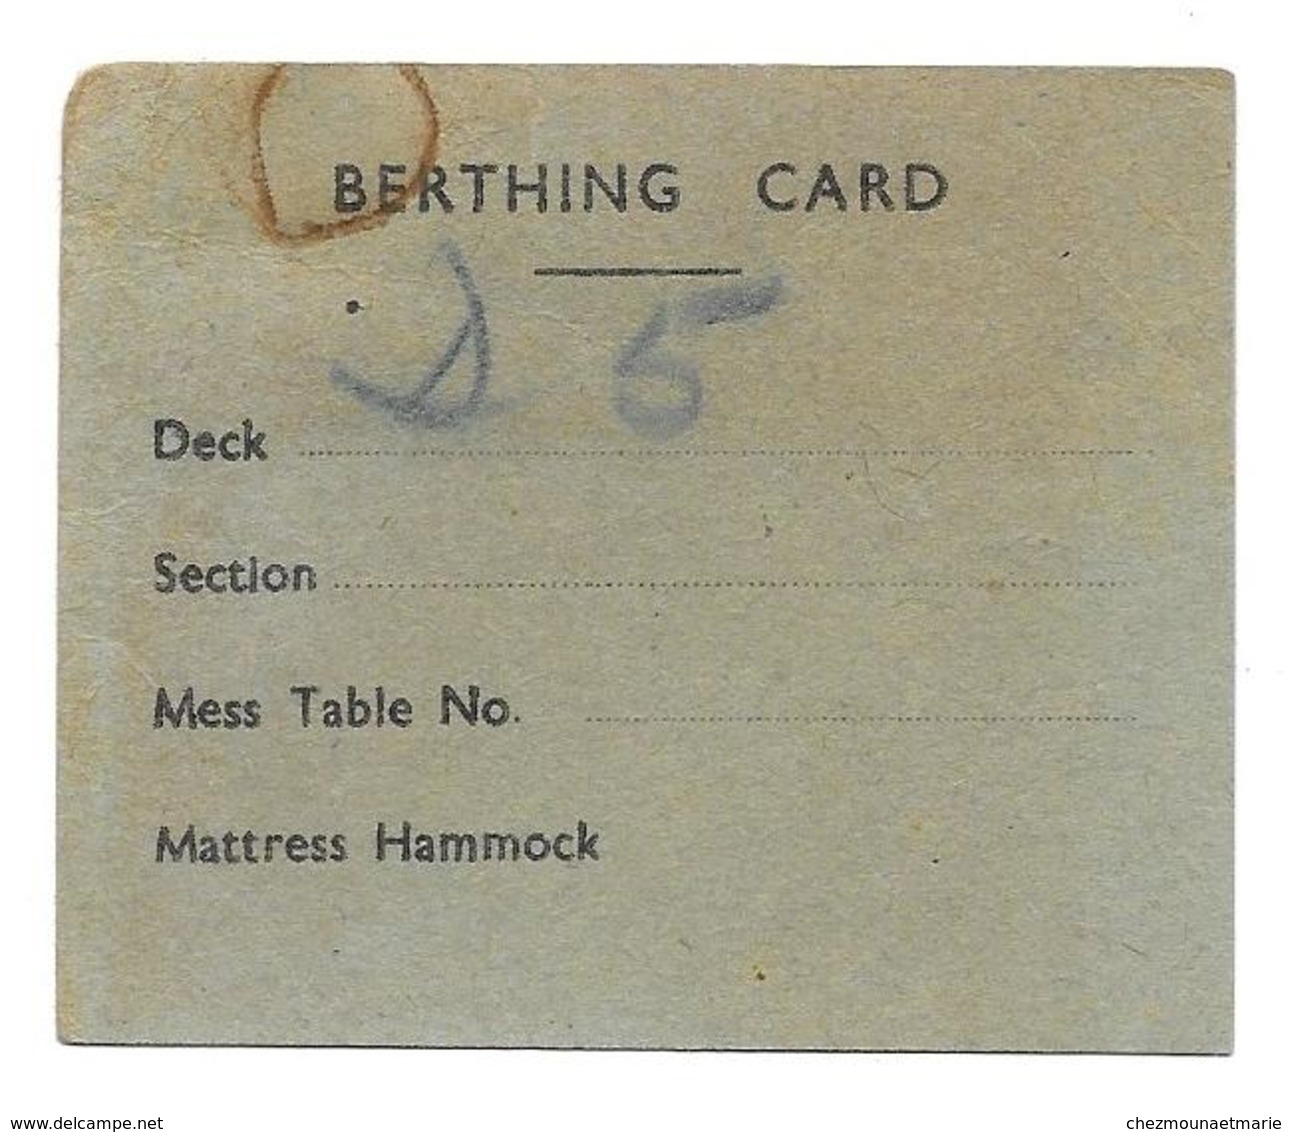 BERTHING CARD - N°5 BOAT DECK AFT N°3 HATCH - FIRE STATION BOAT SATATION - MILITAIRE - Boten